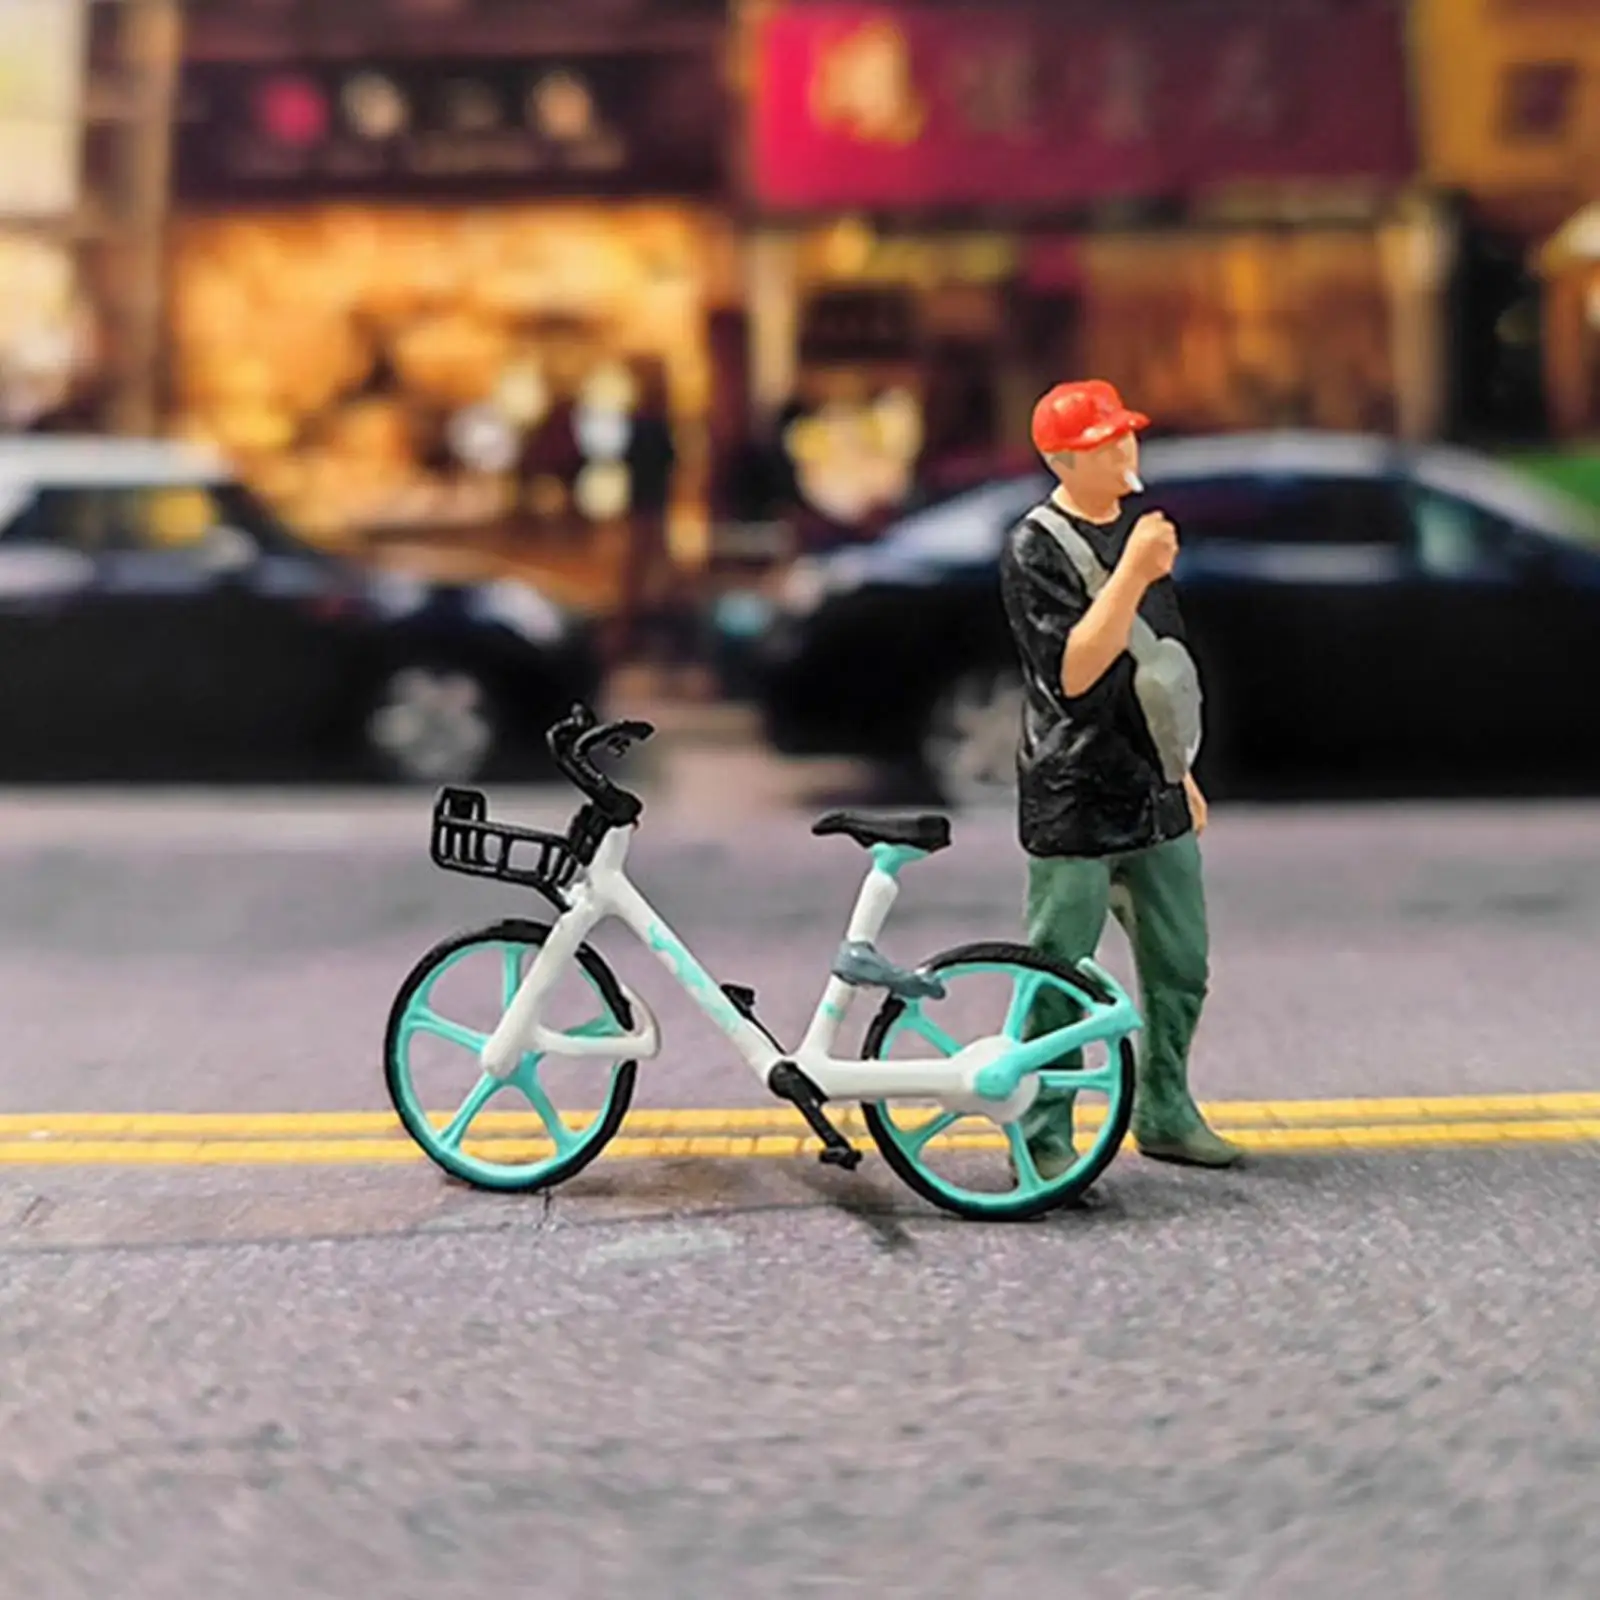 Hand Painted 1/64 Tiny People with Bike  Scenes Building Diorama Railway Toys Children Toys Decoration for  DIY Projects